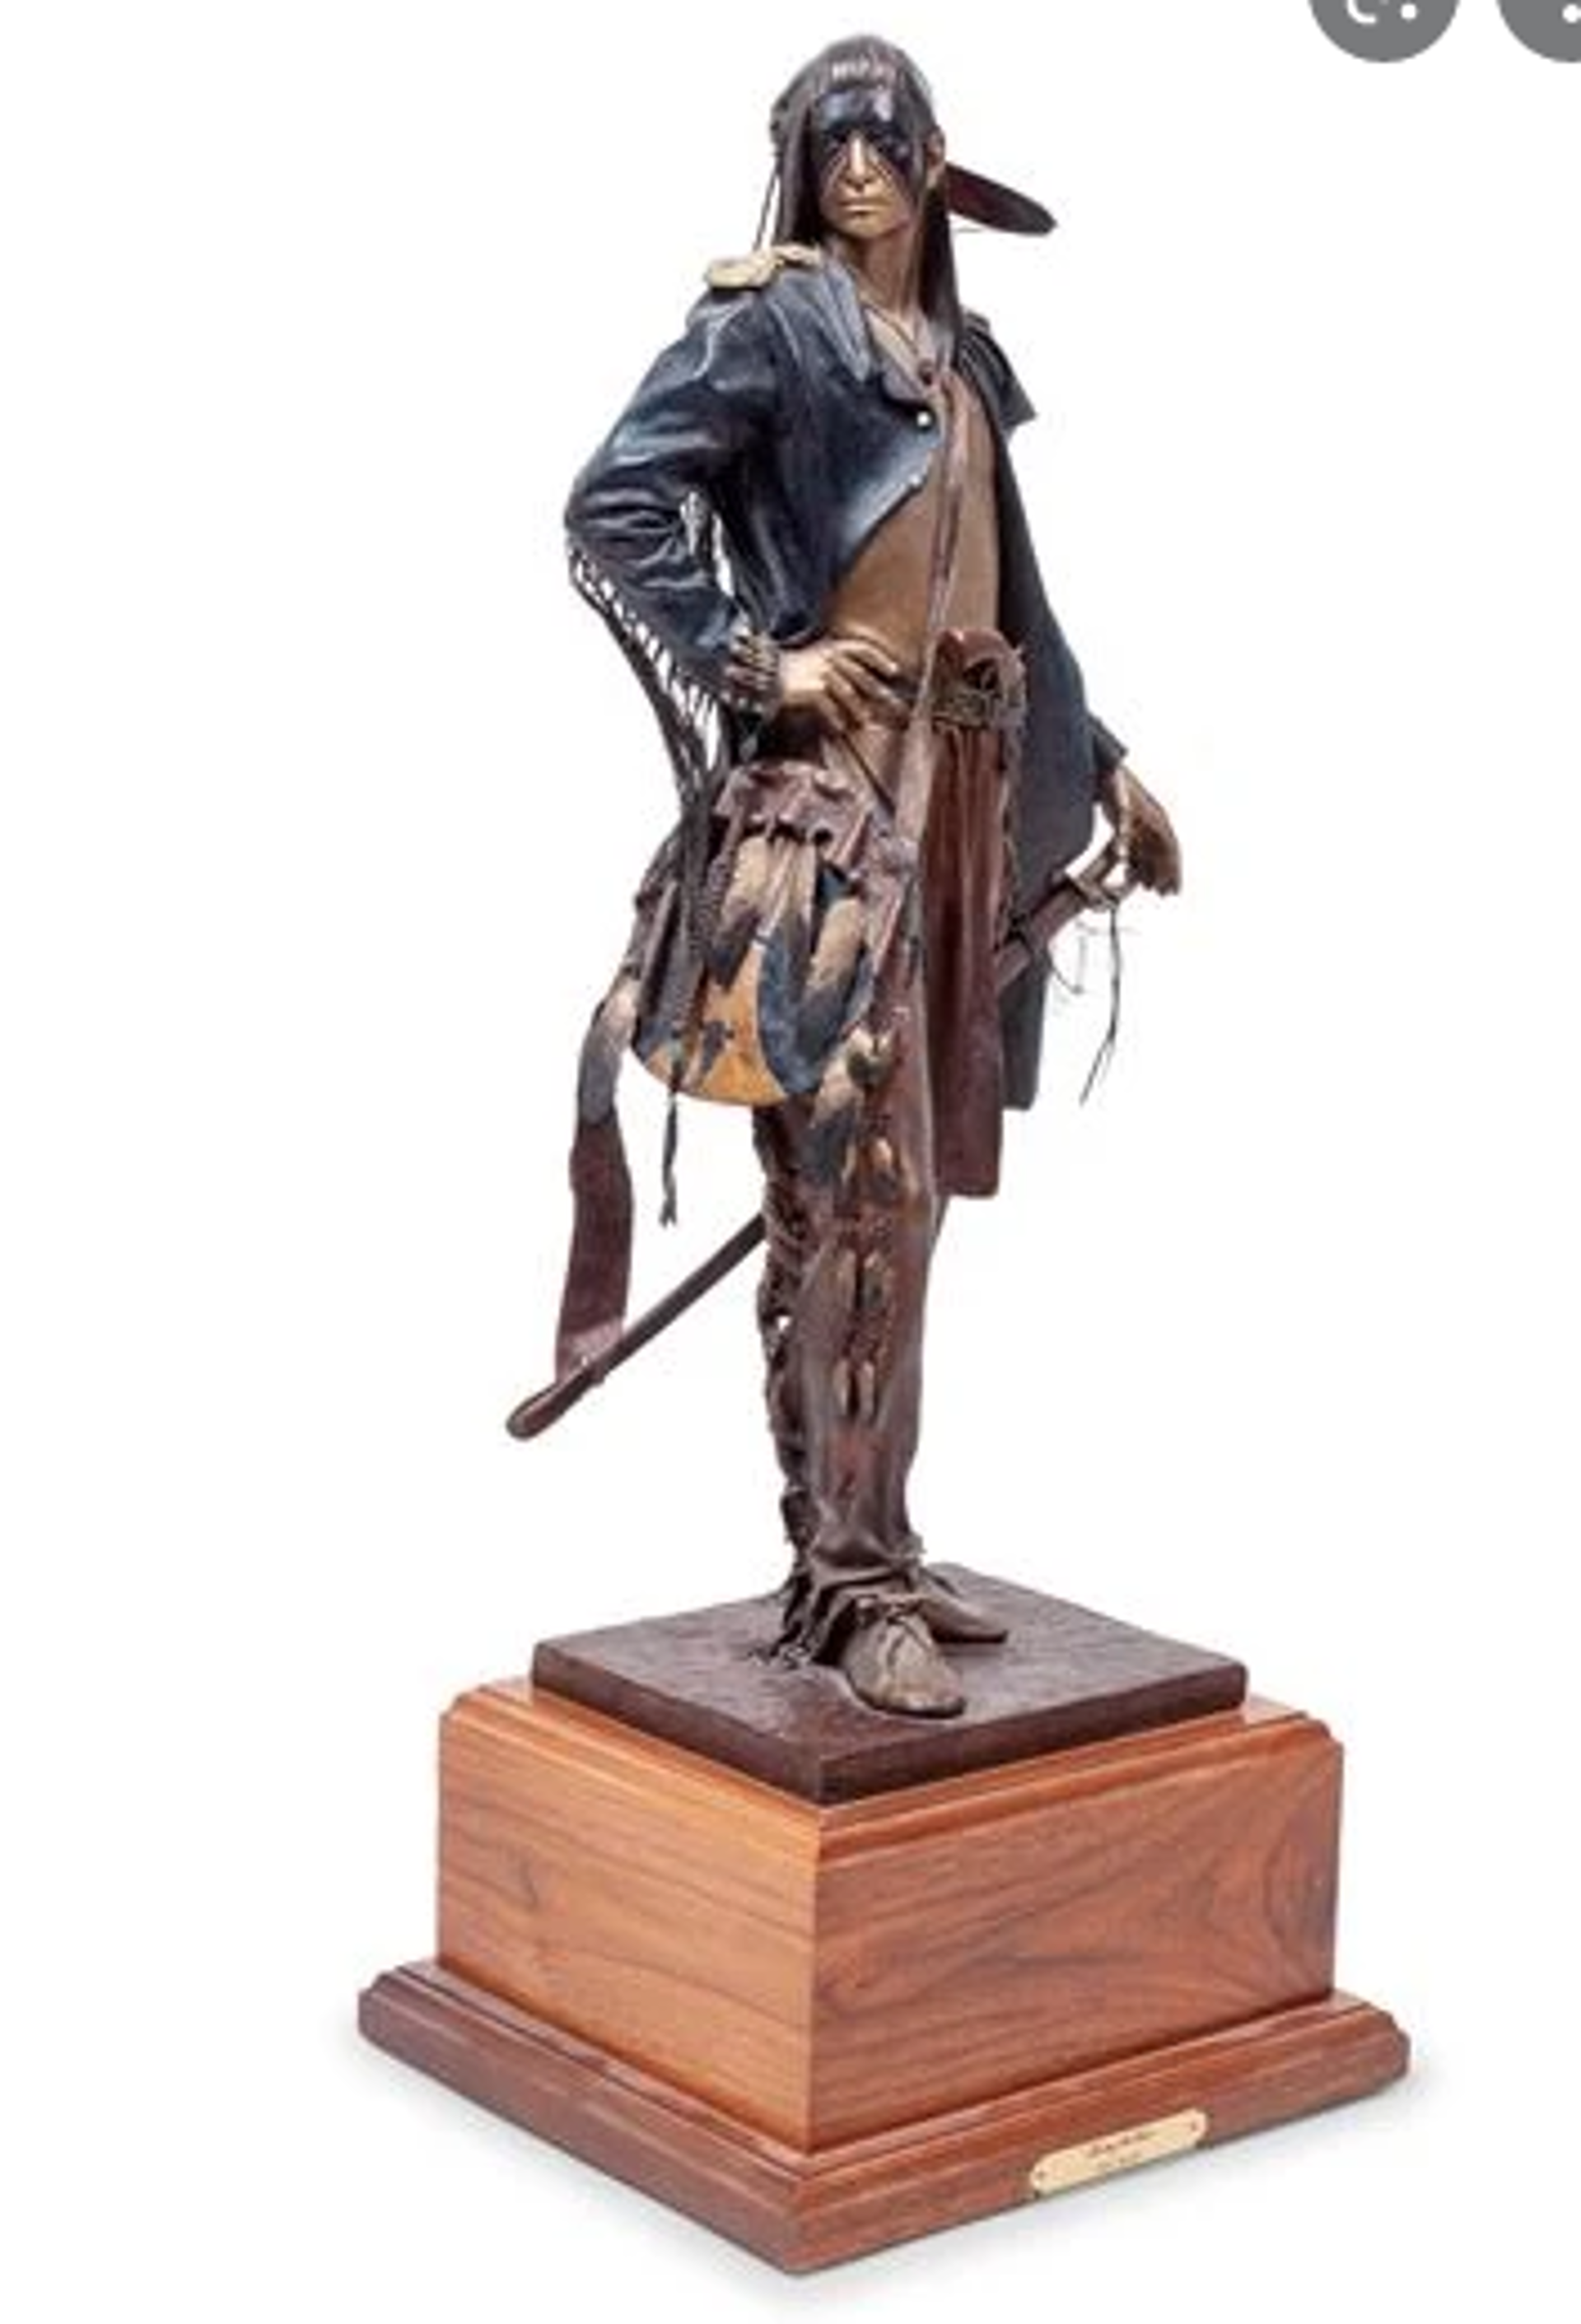 Long Soldier mw #5/30 by Dave McGary (sculptor) (1958-2013)